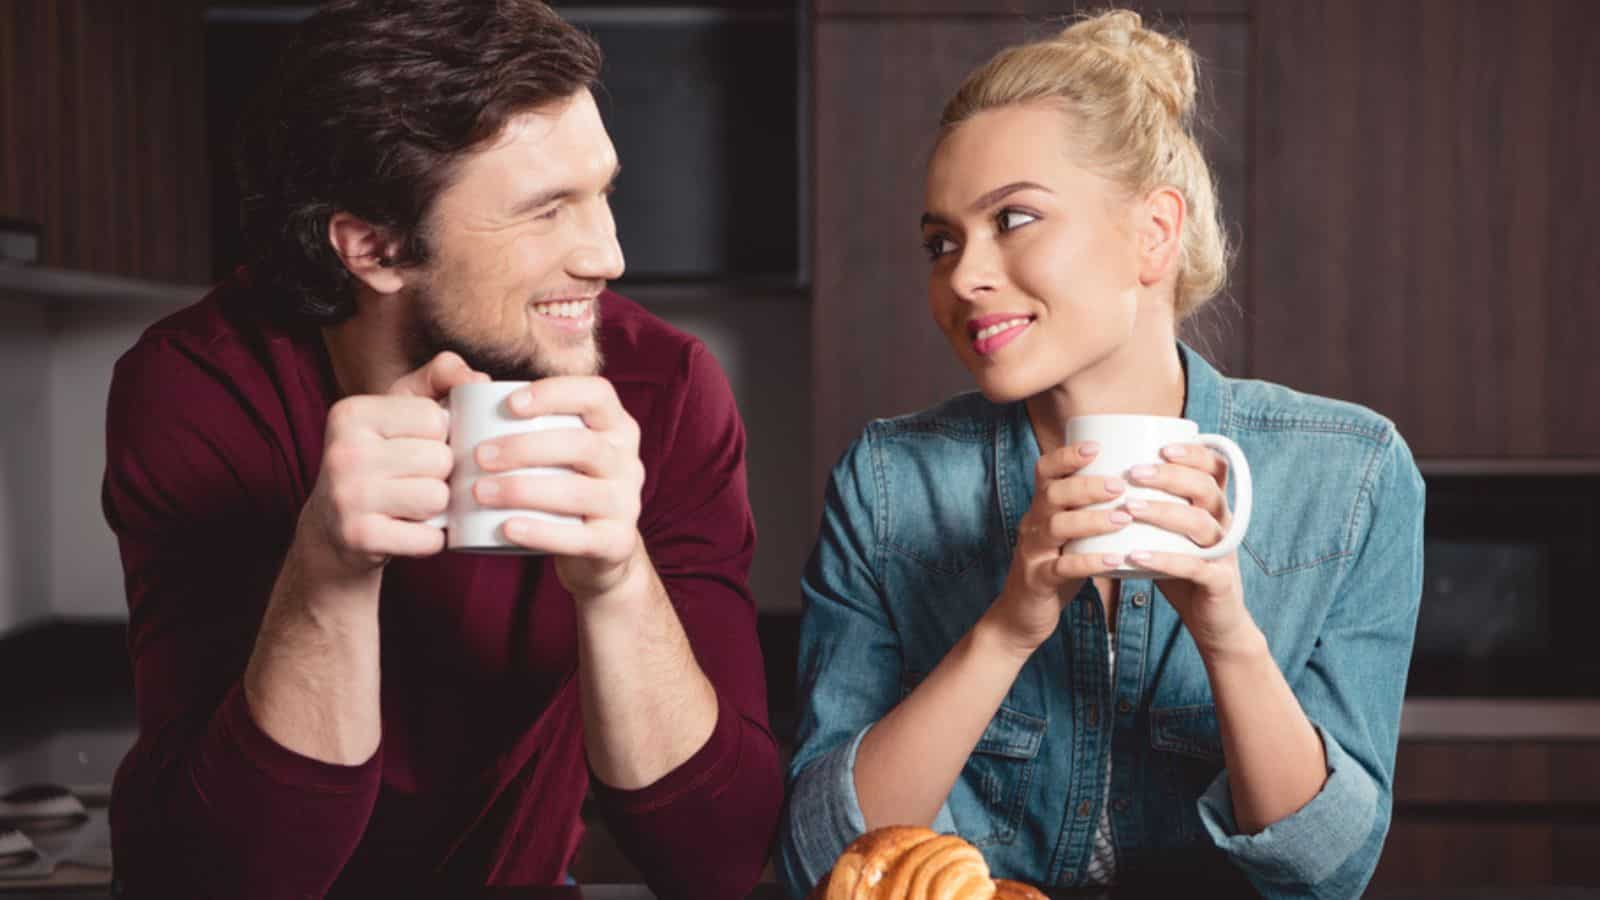 Smiling couple holding coffee cups and looking at each other in kitchen